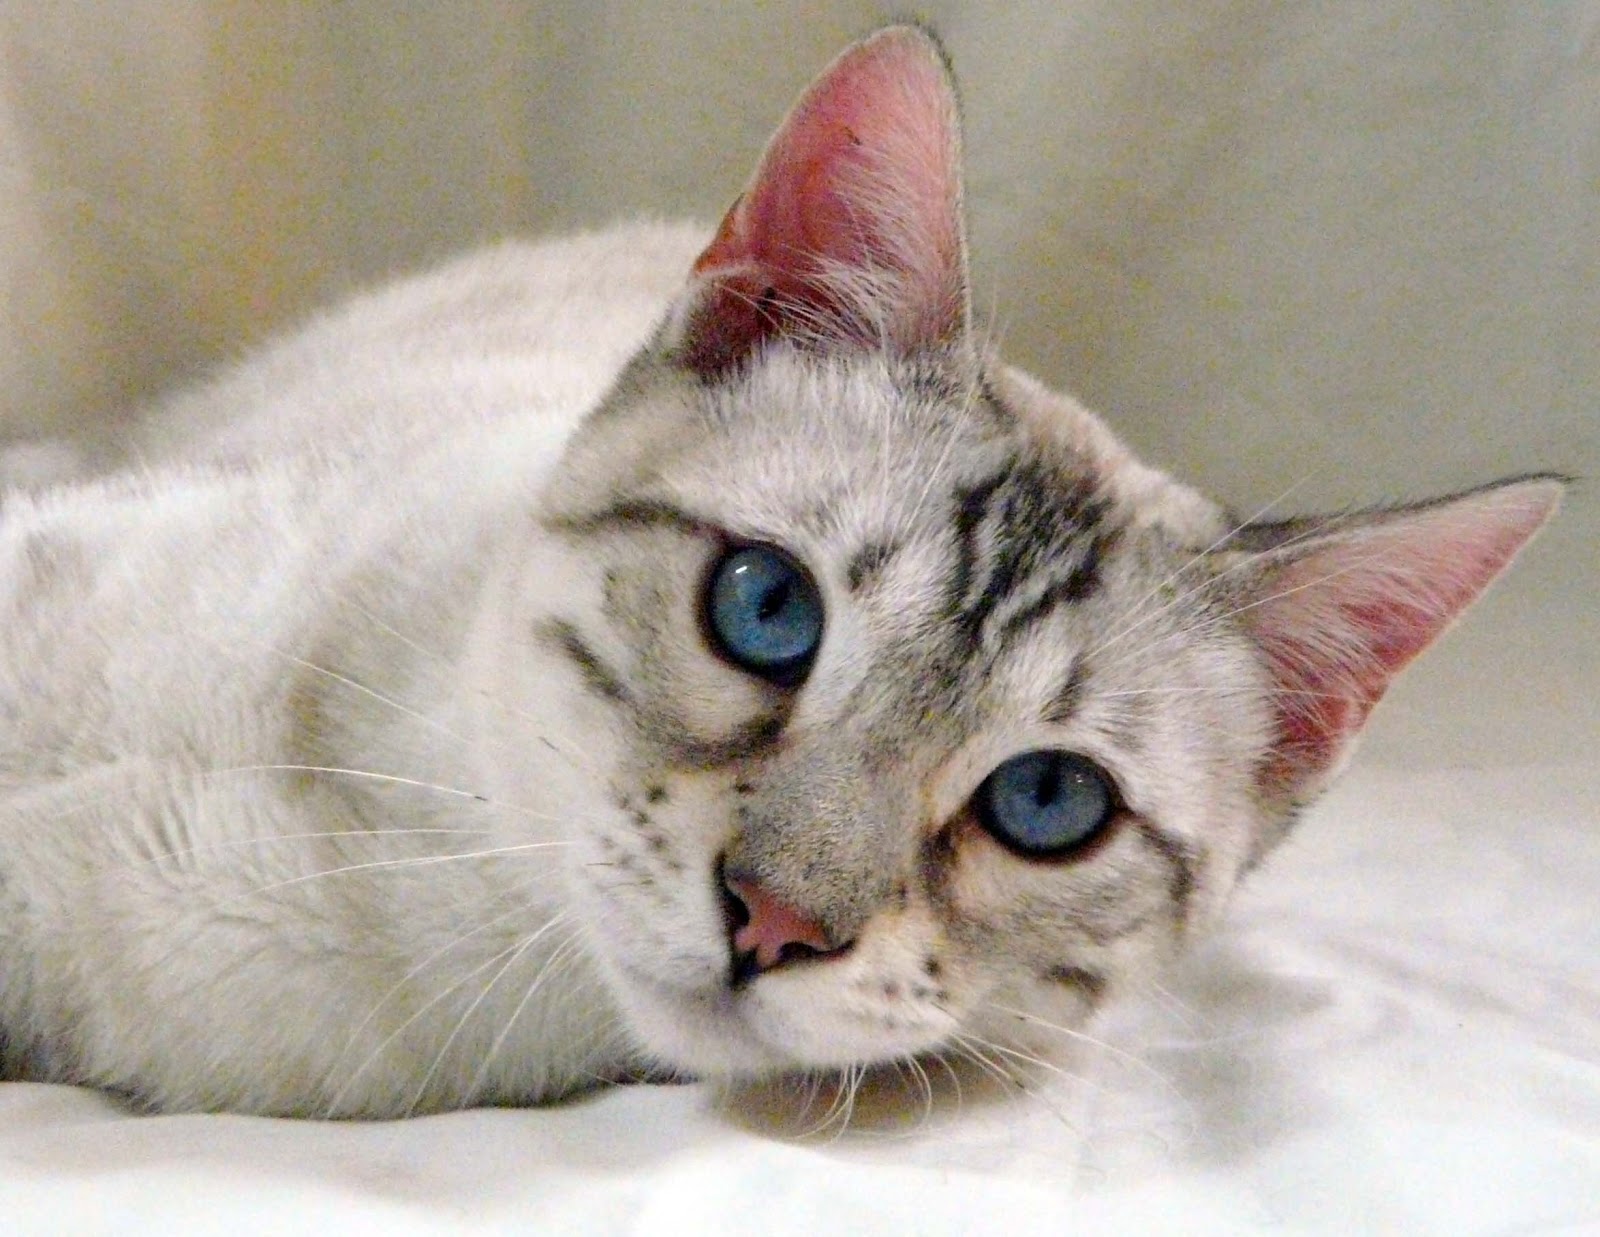 43 Top Images White Bengal Cat / Snow & White Bengal Cats for Sale | Wild & Sweet Bengals